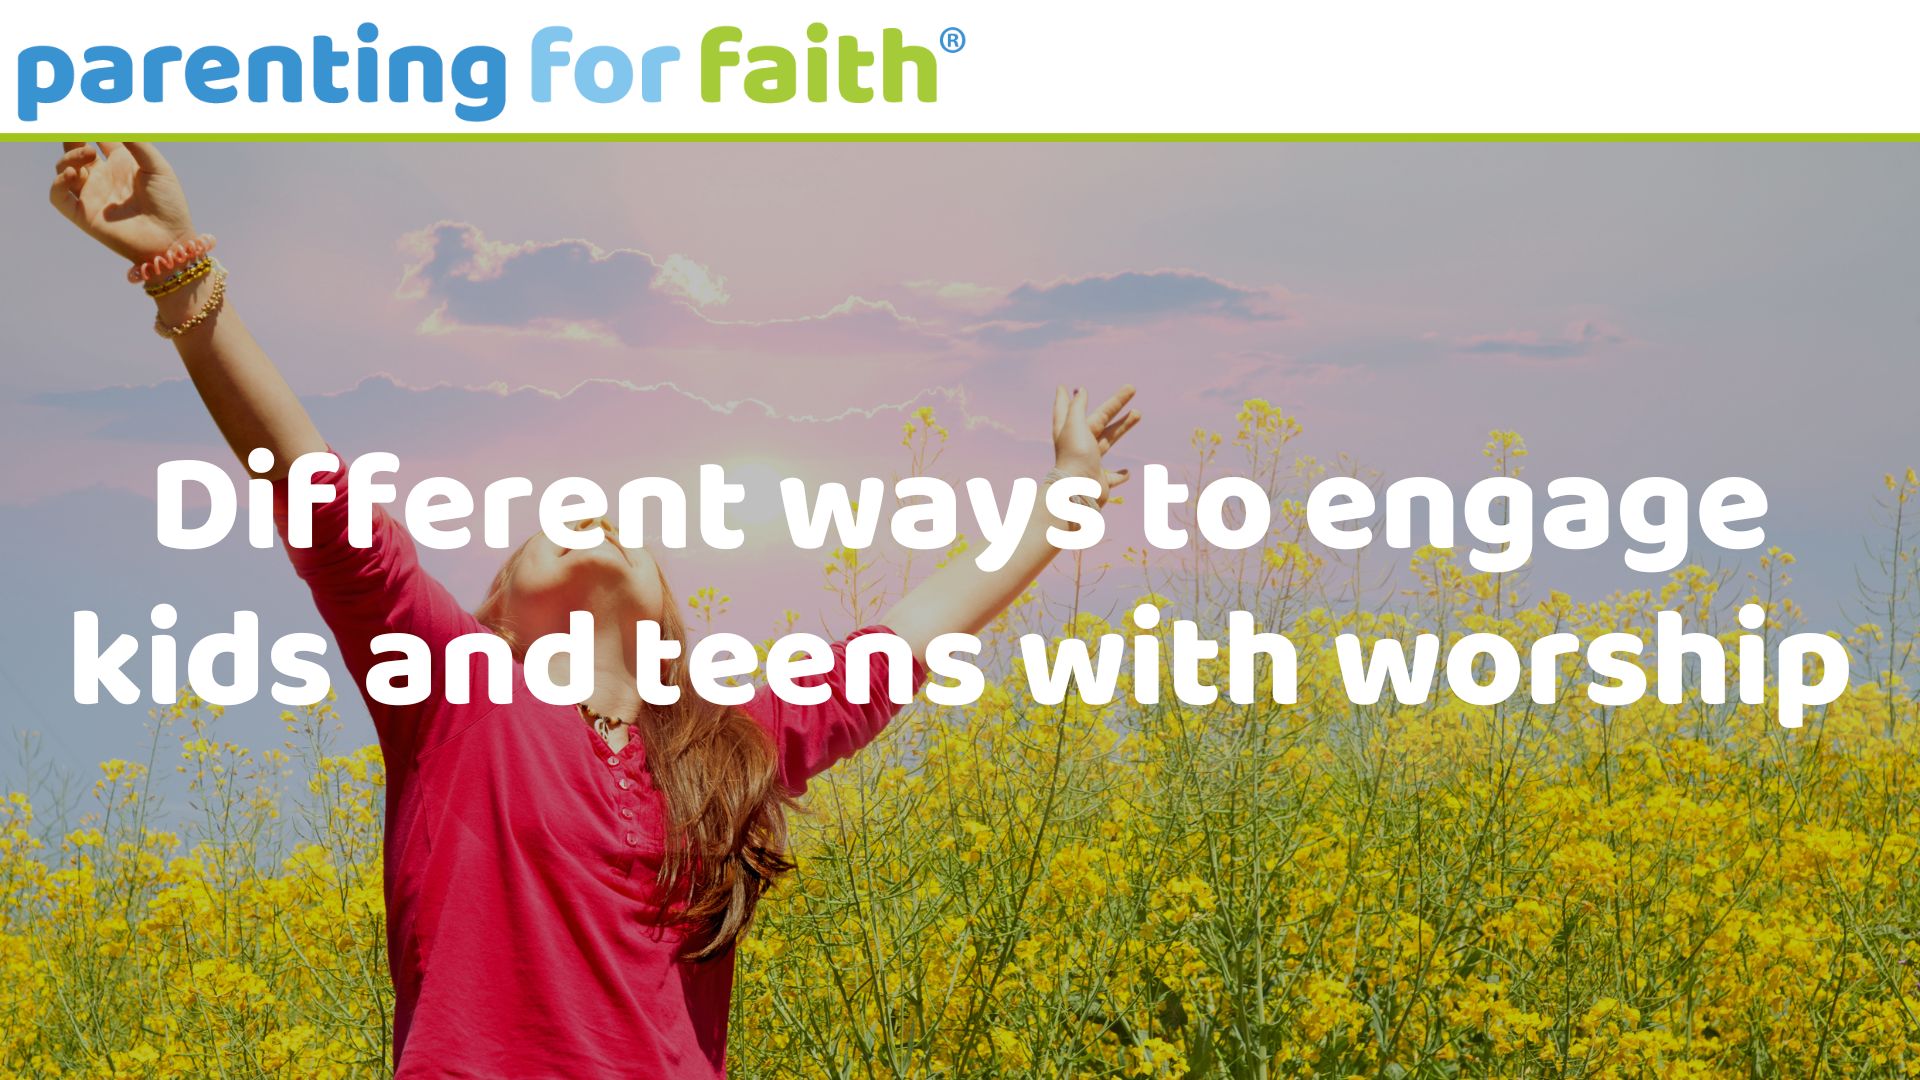 different ways to engage kids and teens with worship image credit Maica from Getty Images Signature